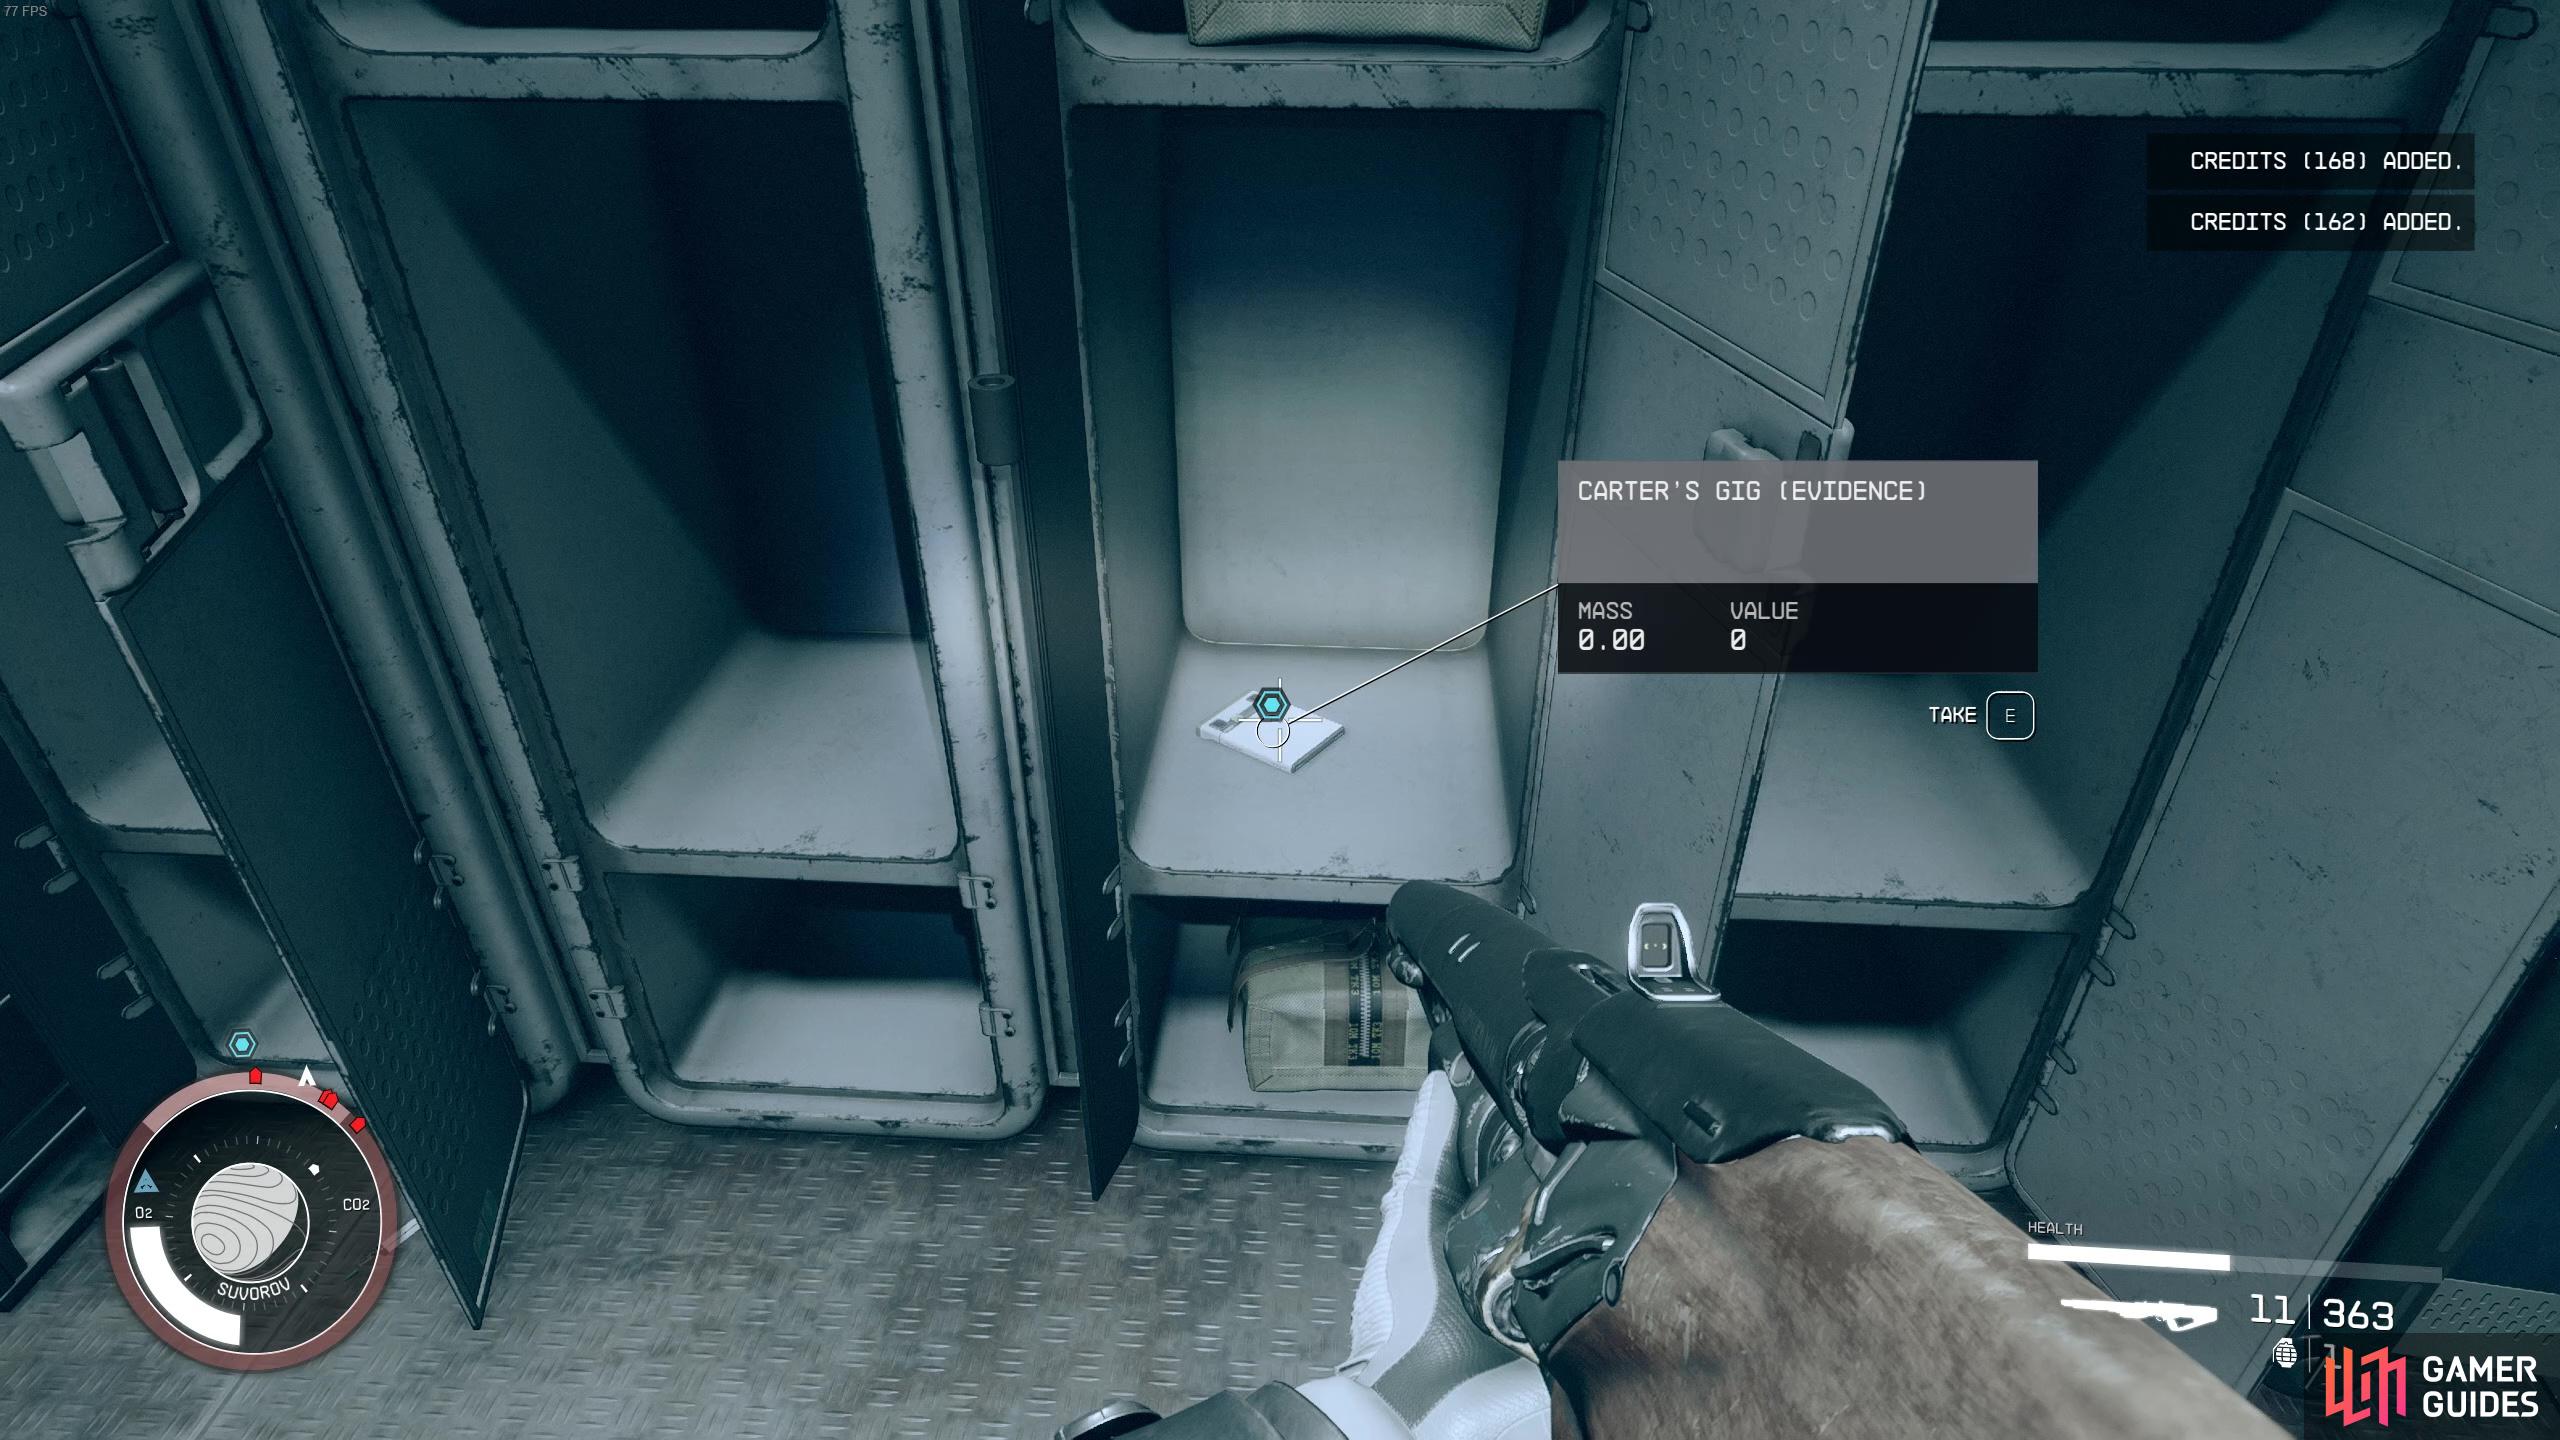 Carter's Gig is found in The Lock and can't be missed because it's a part of the quest objective!